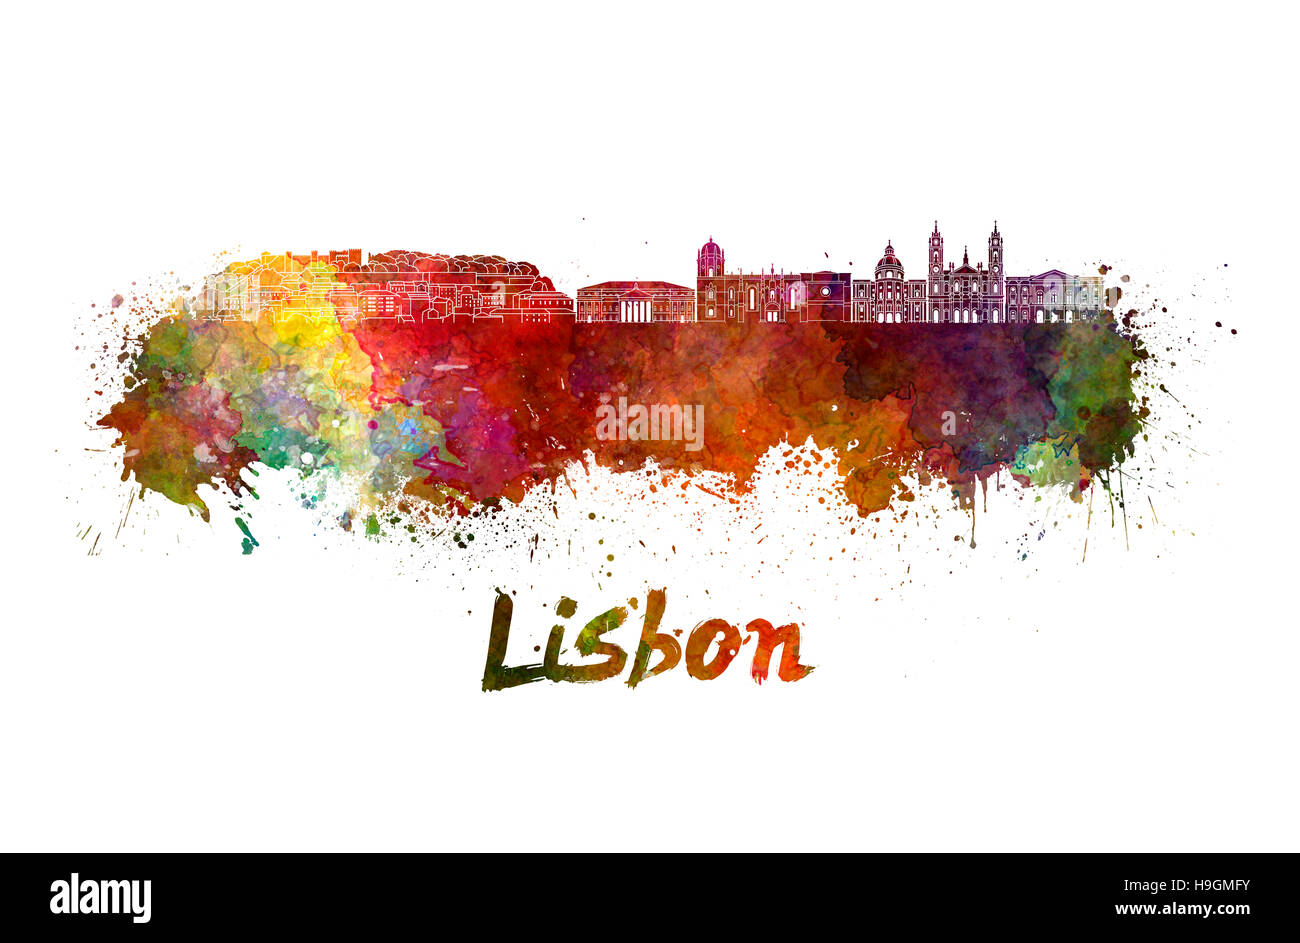 Lisbon skyline in watercolor splatters with clipping path Stock Photo